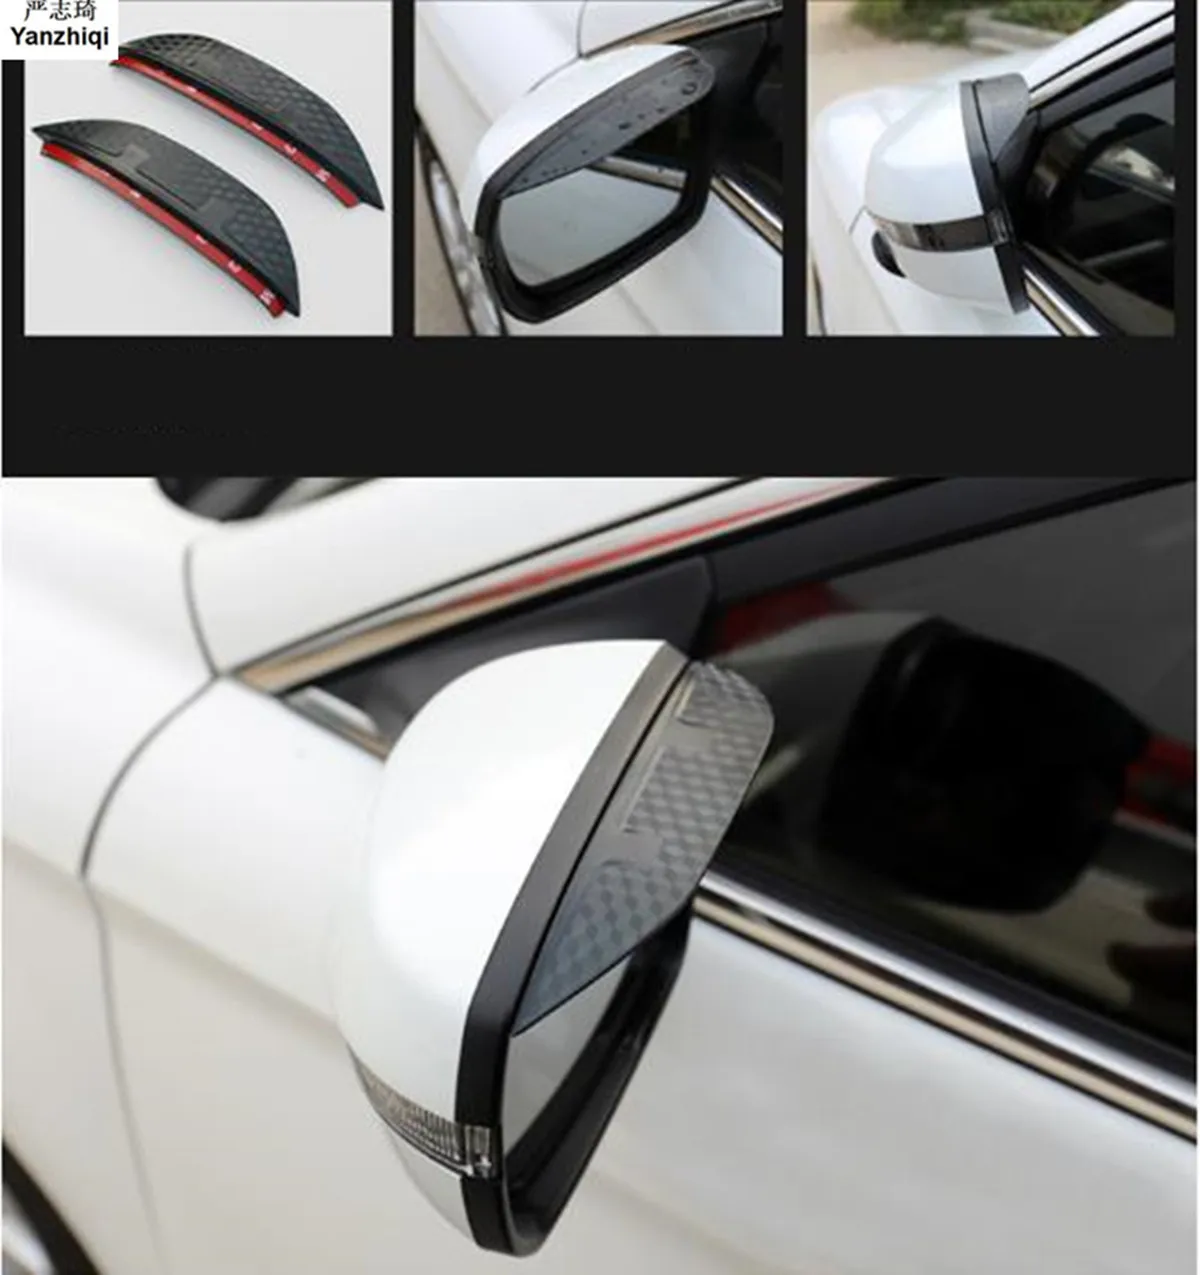 

Free shipping Acrylic carbon fiber pattern rearview mirror reflector eyebrow rain car stickers for 2006-2017 Volkswagen VW POLO